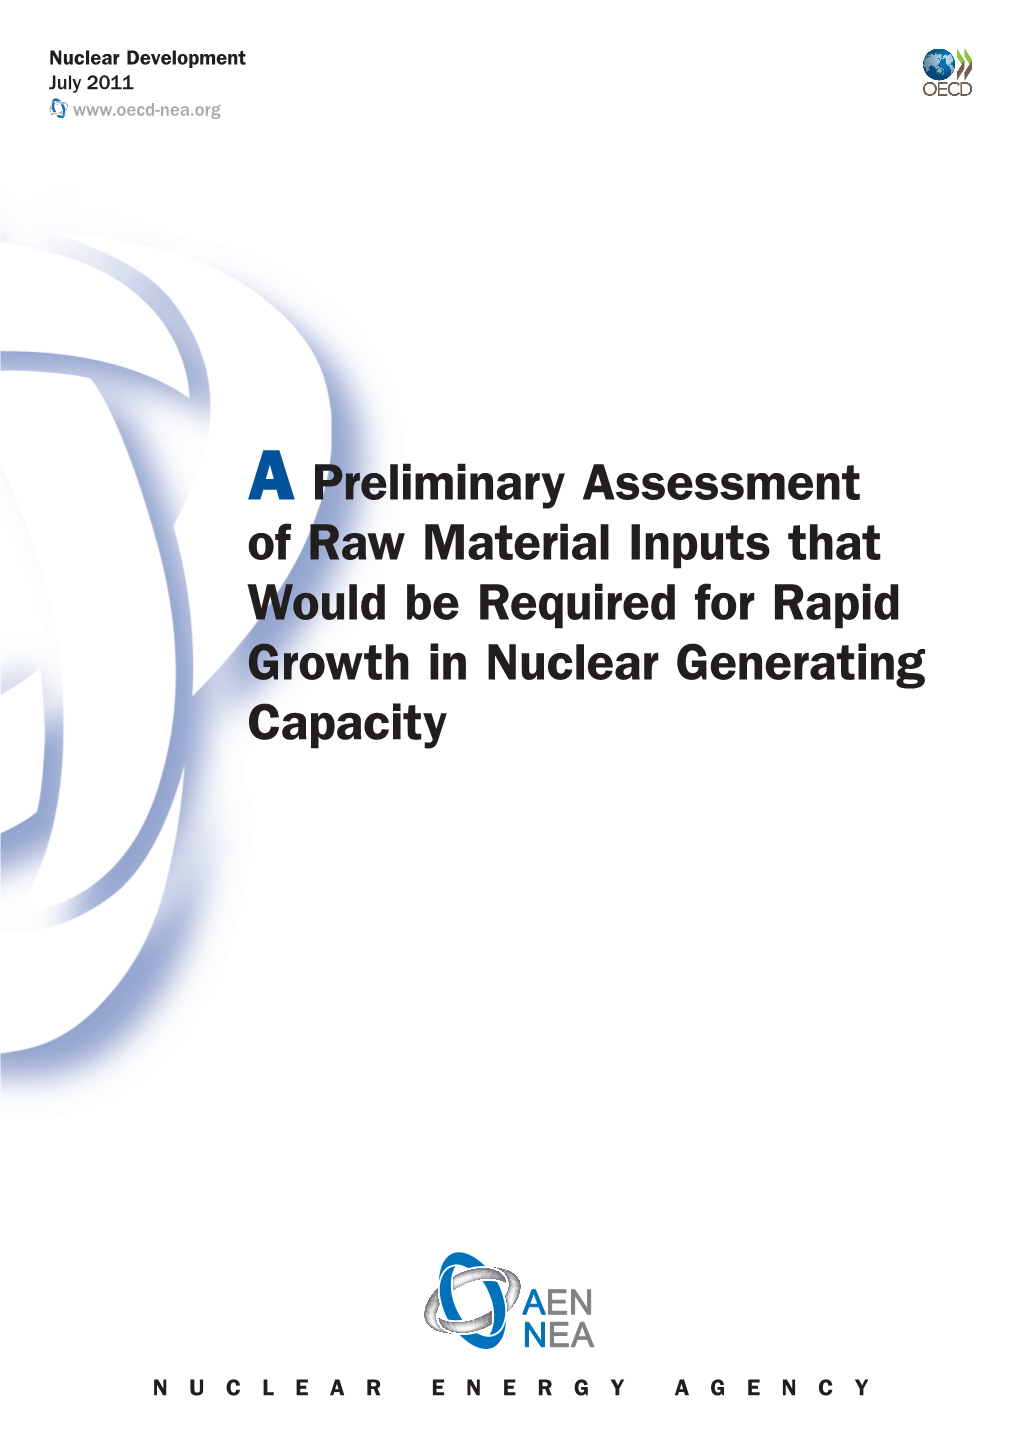 A Preliminary Assessment of Raw Material Inputs That Would Be Required for Rapid Growth in Nuclear Generating Capacity